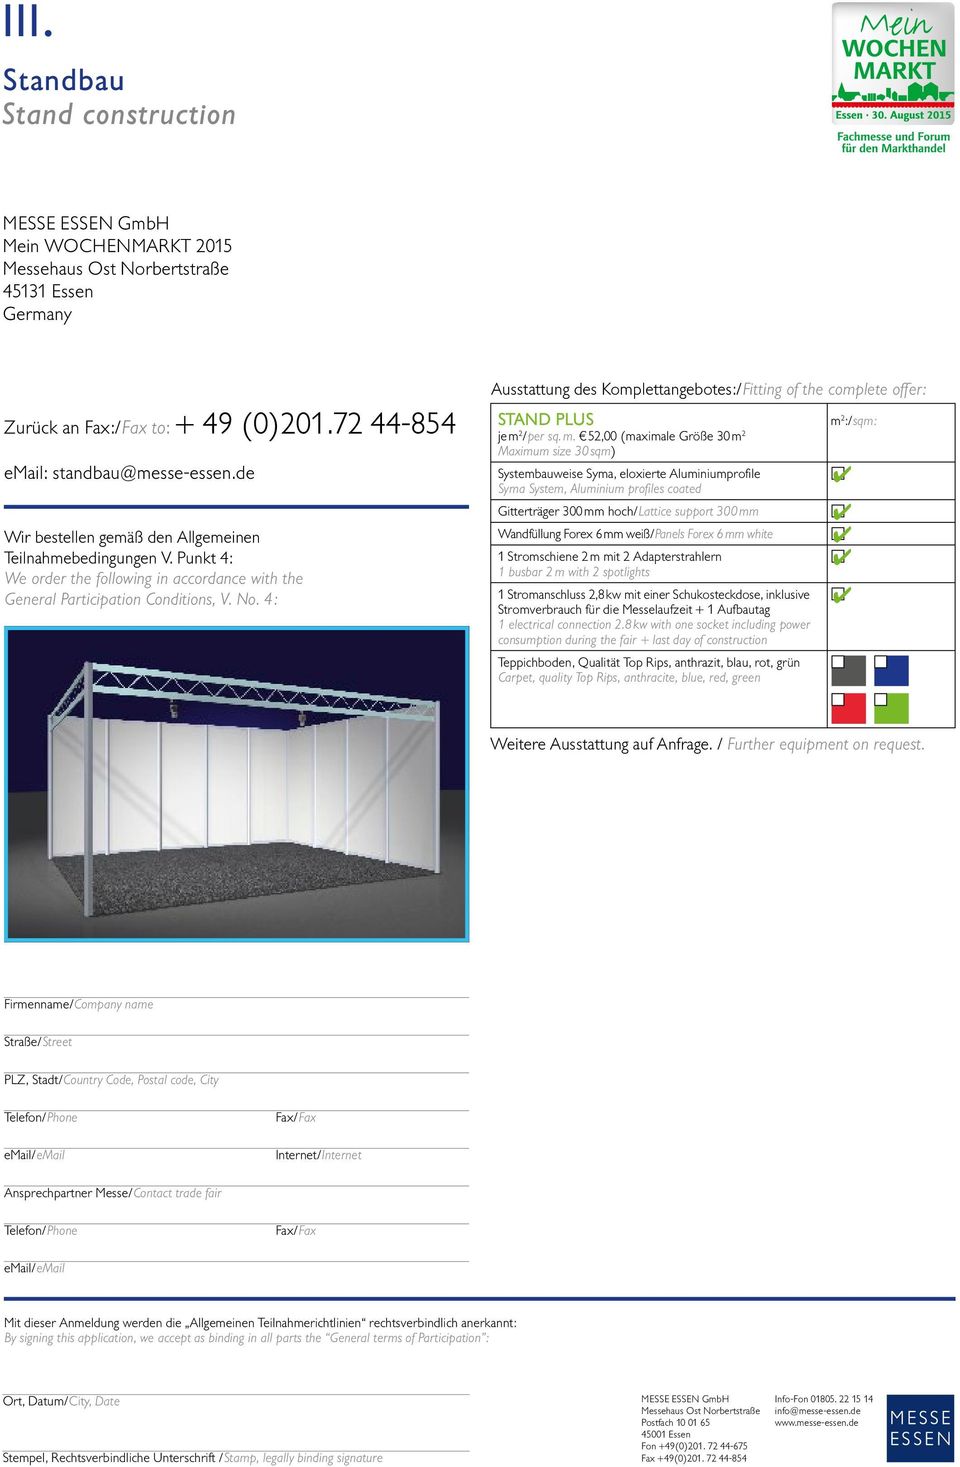 : Ausstattung des Komplettangebotes:/Fitting of the complete offer: STAND PLUS je m 